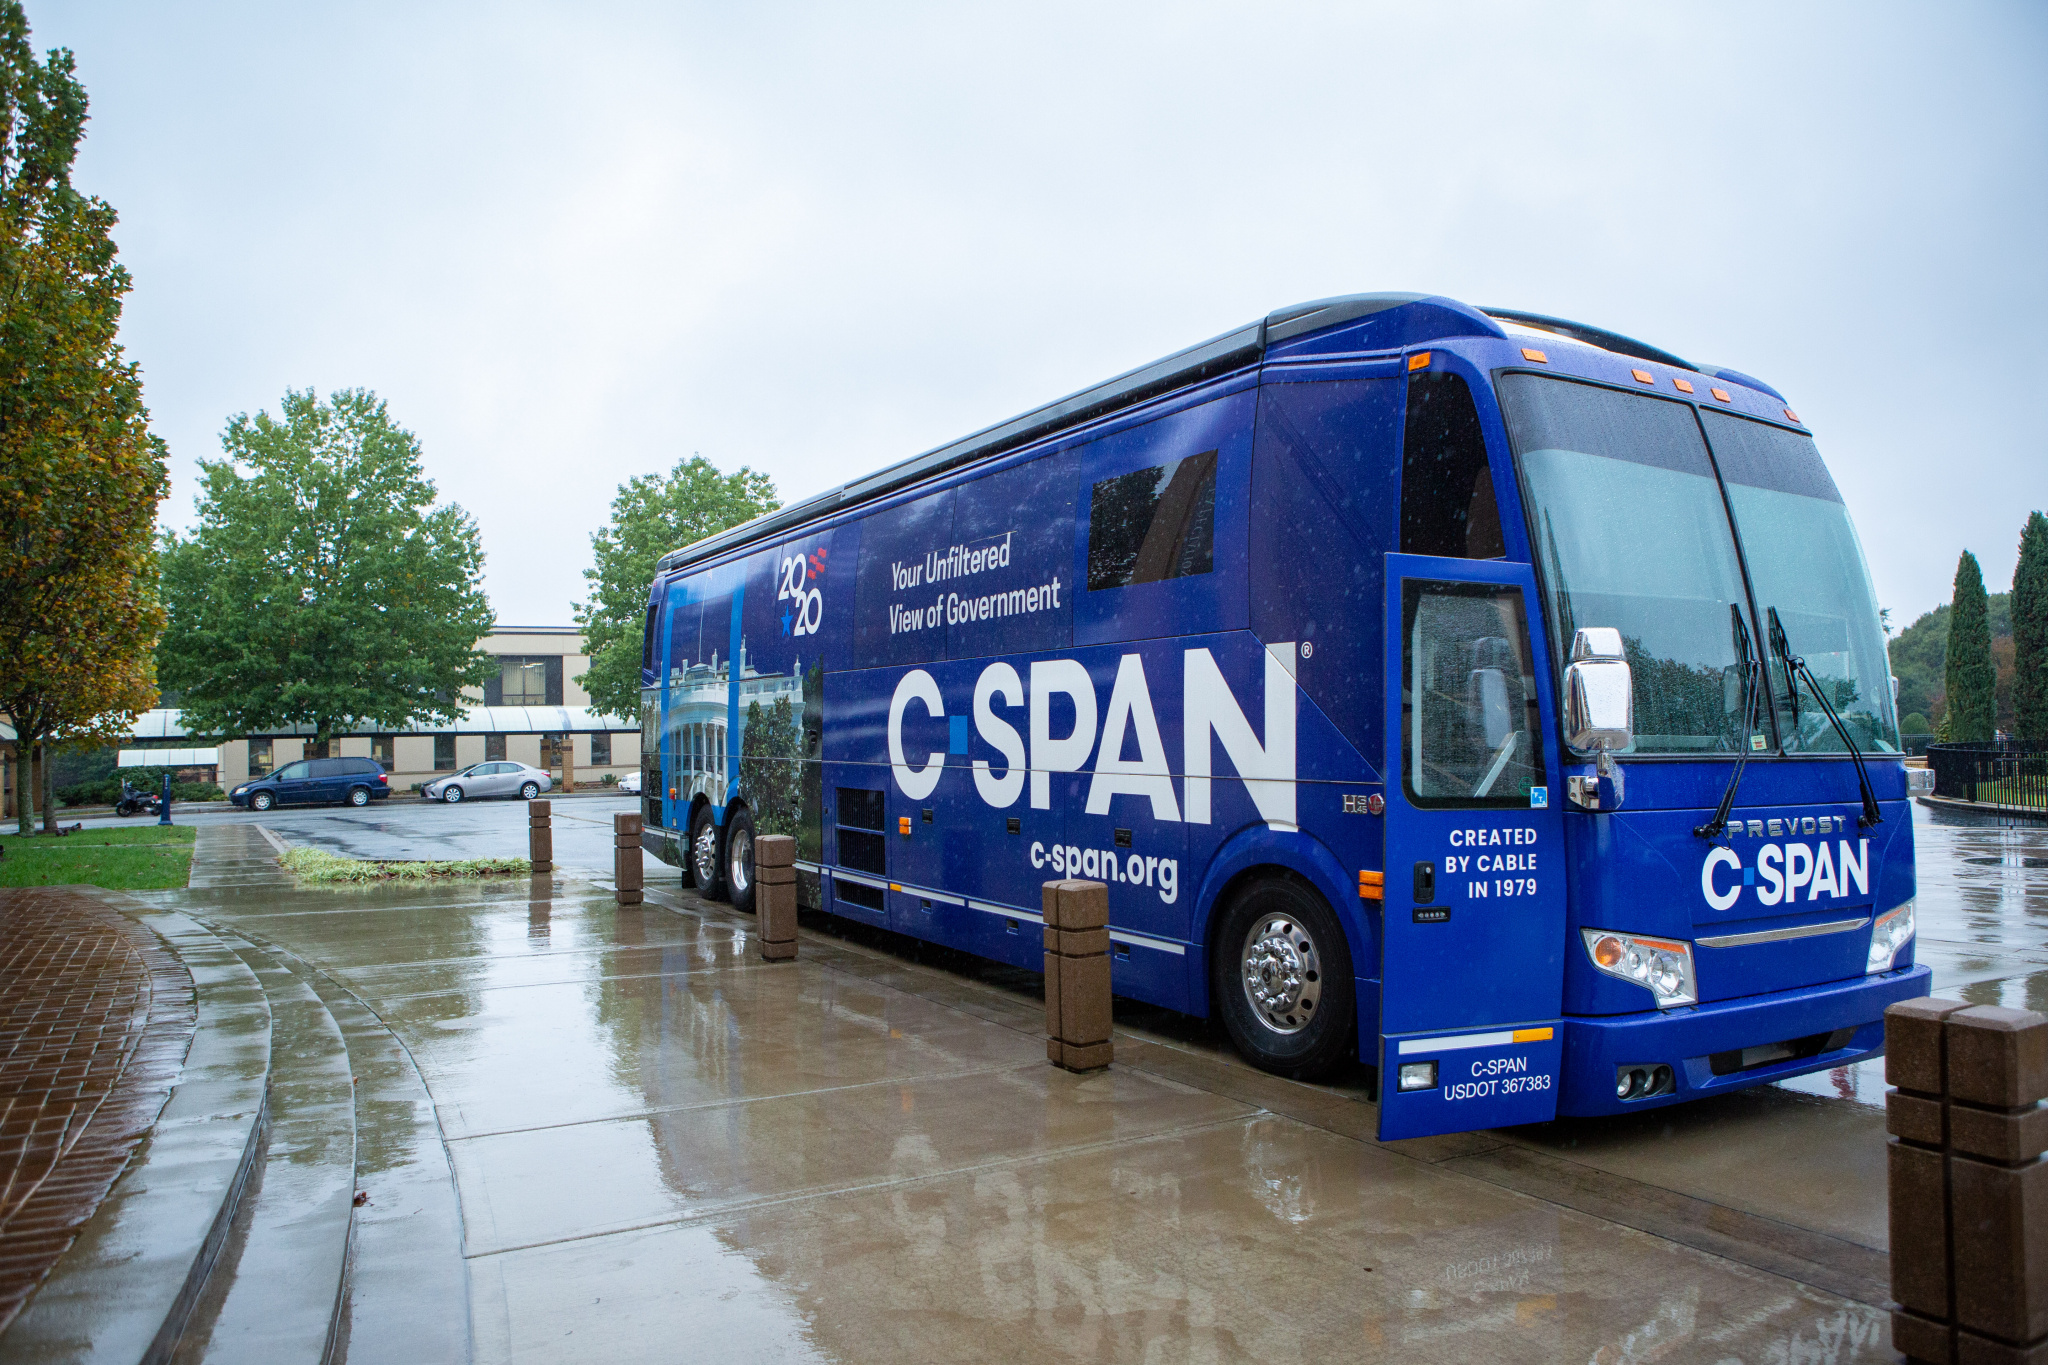 The C-SPAN bus parked in front of Rodeheaver Auditorium (Photo by Chad Ratje)